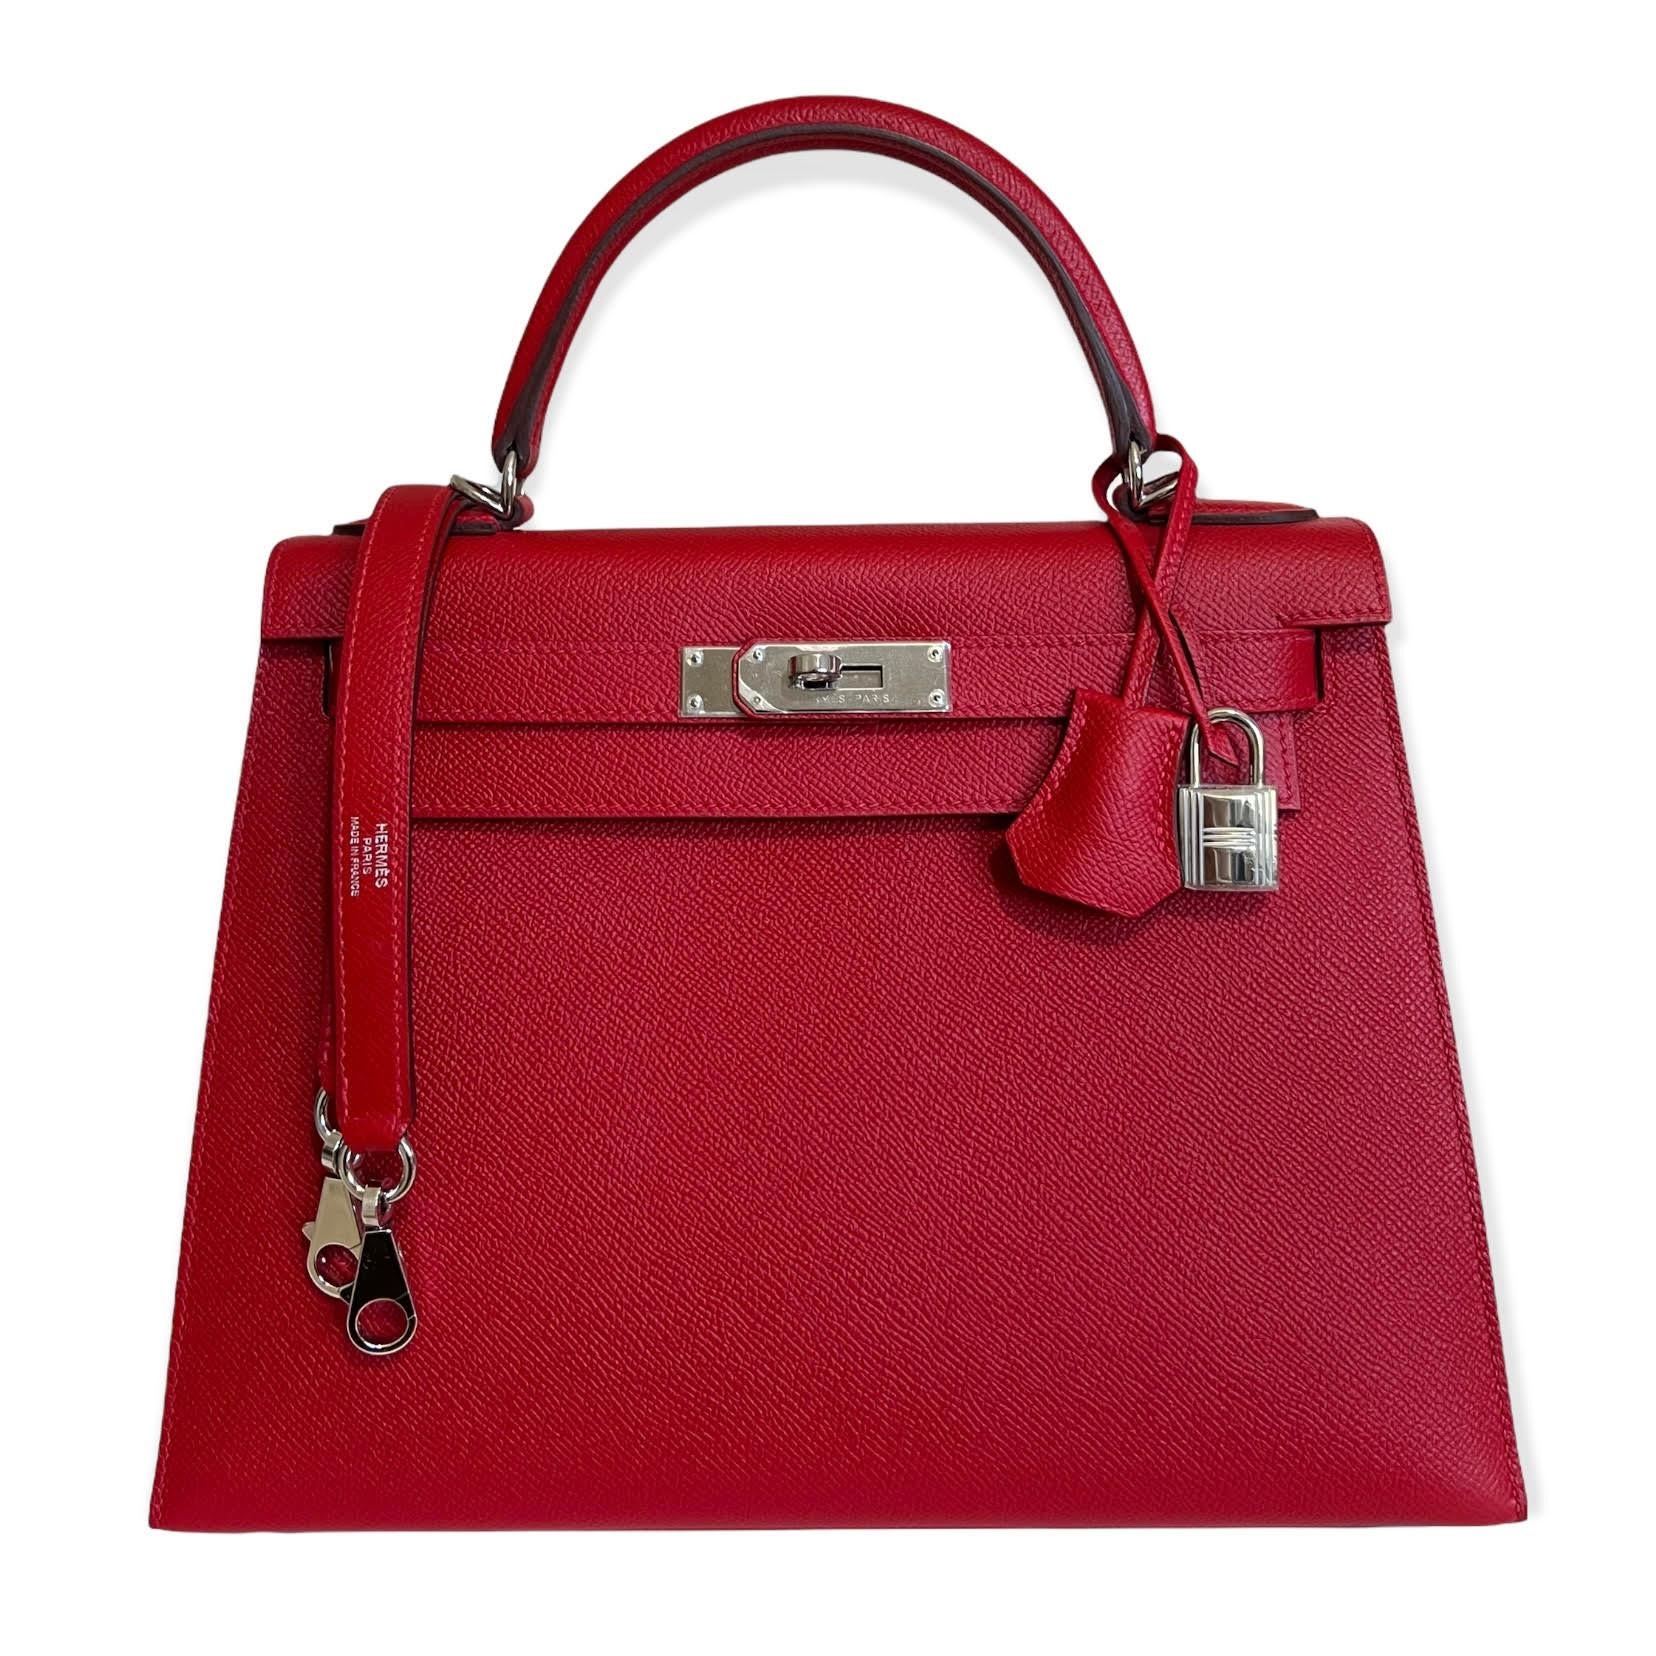 This authentic Hermès Lipstick Red Epsom 28 cm Kelly Sellier is in pristine condition with the protective plastic intact on the hardware.     Hermès bags are considered the ultimate luxury item worldwide.  Each piece is hand sewn with waitlists that